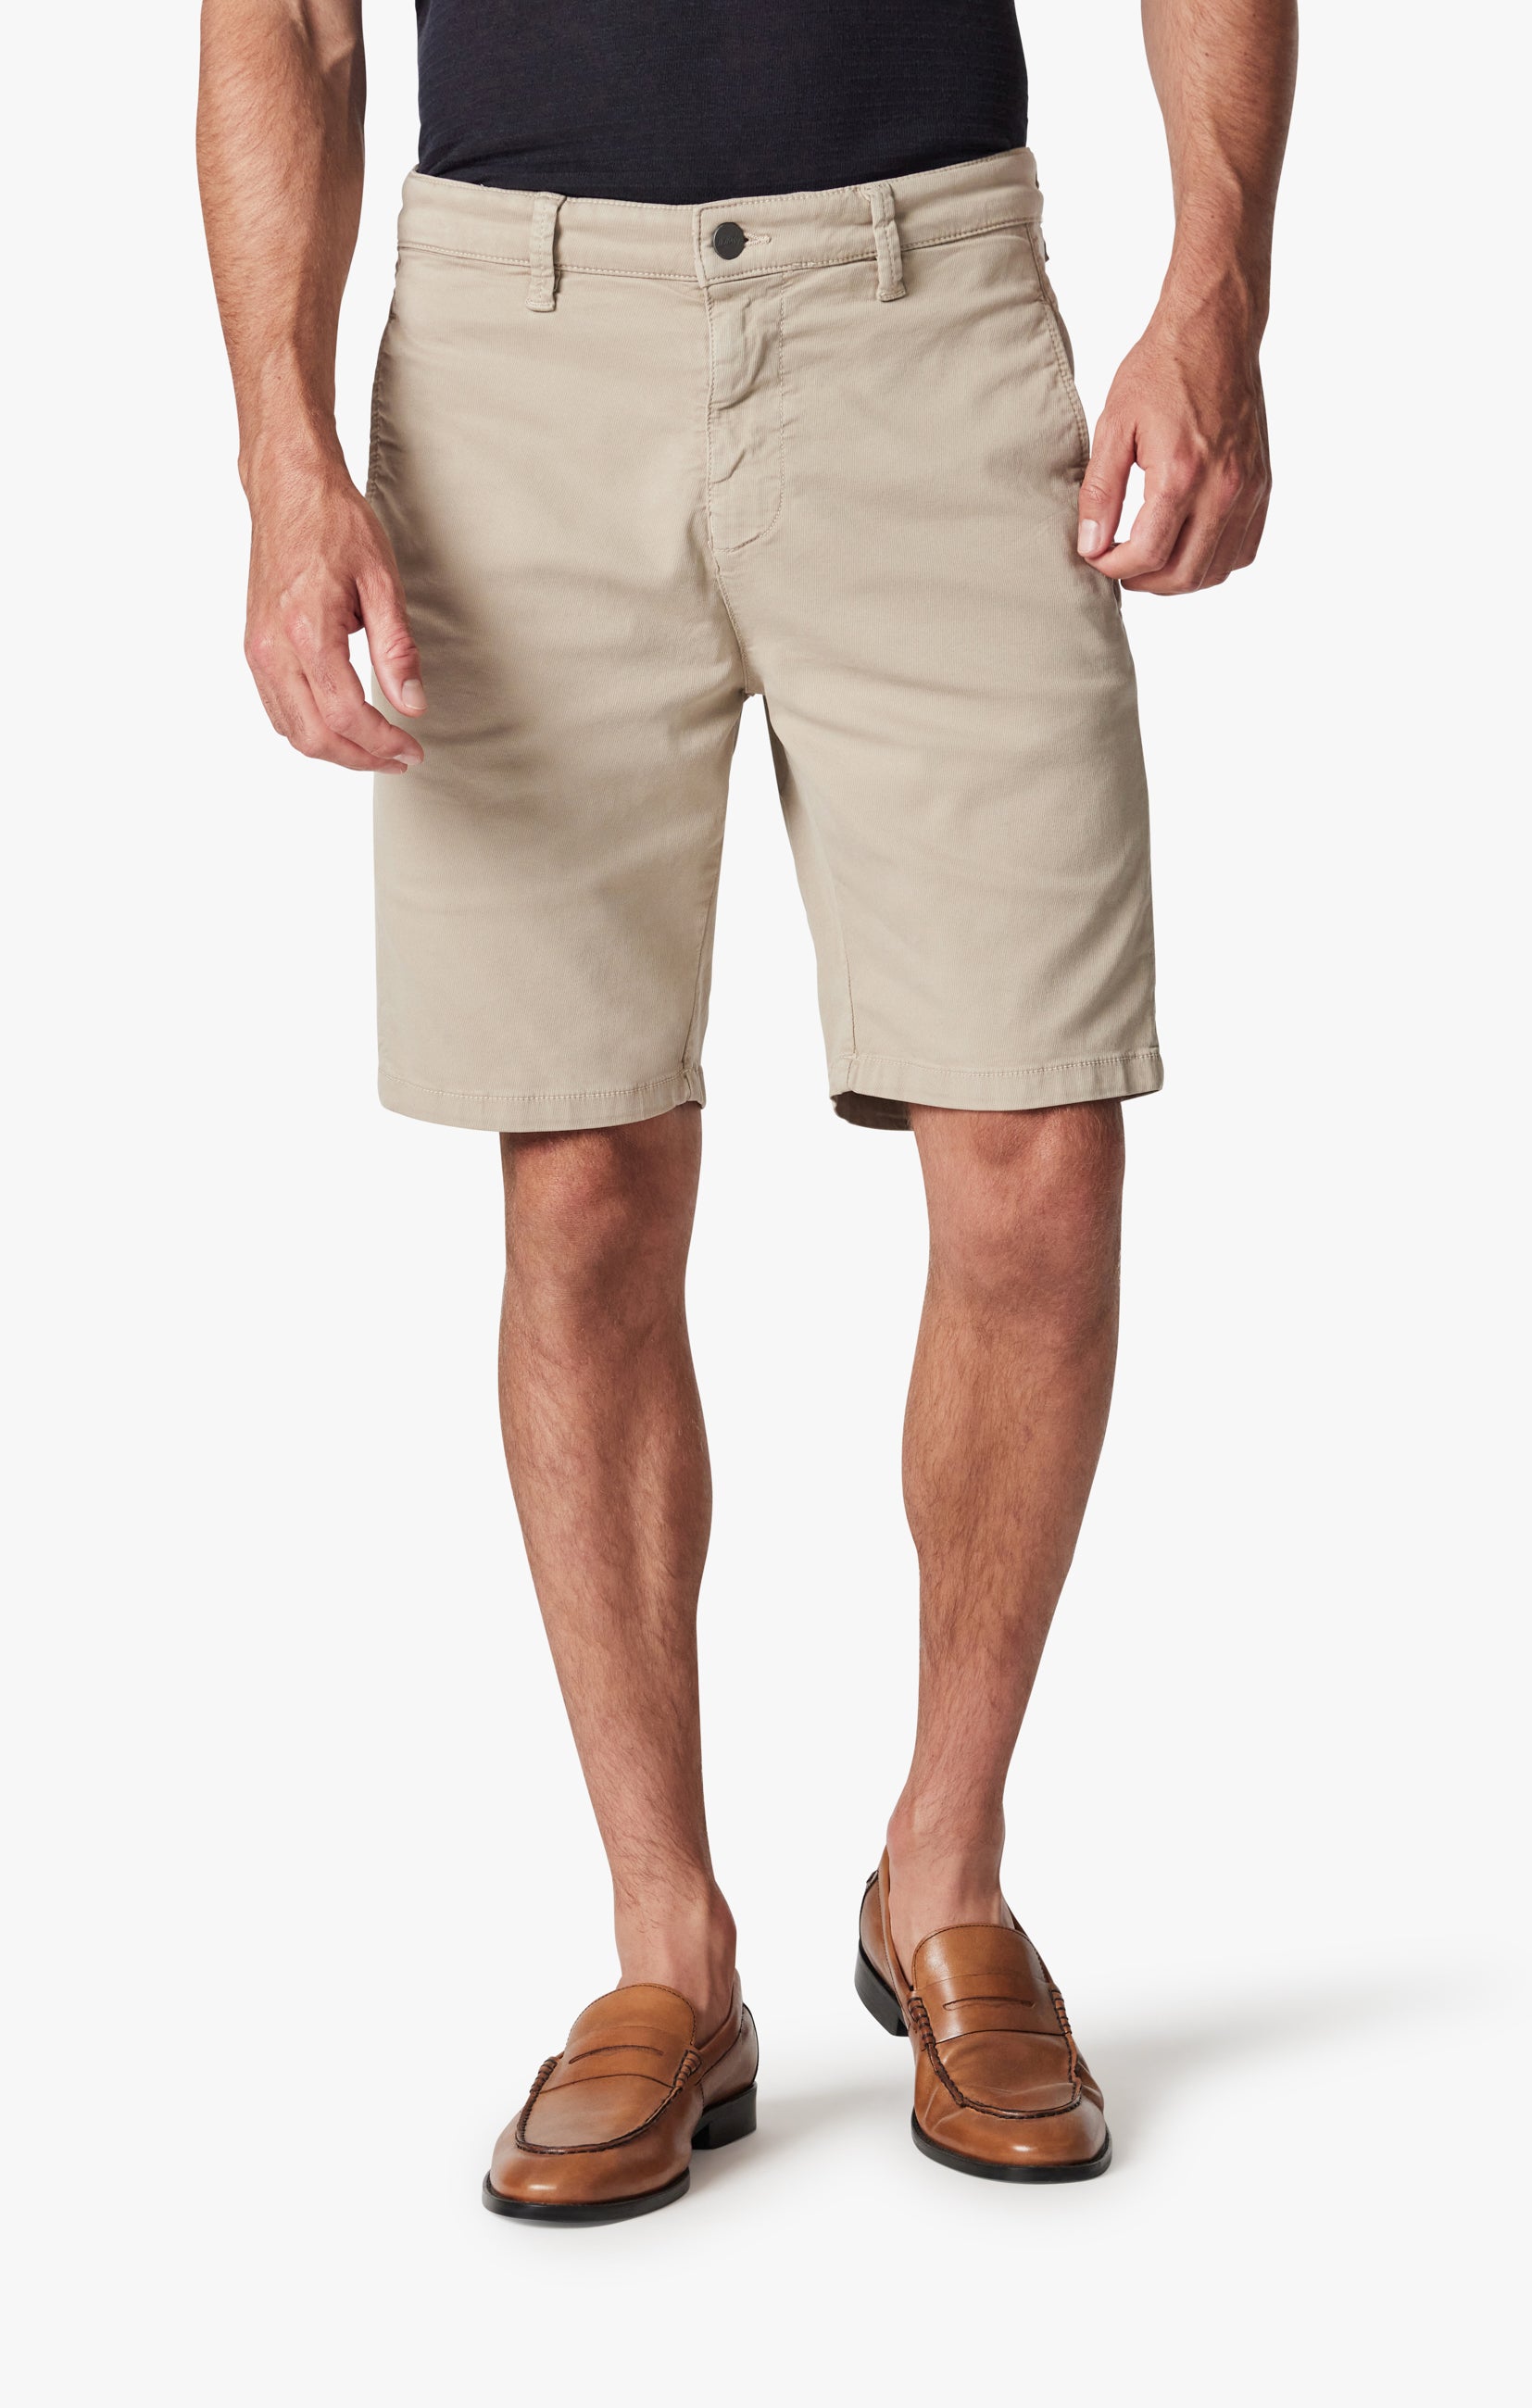 Nevada Shorts In Laurel Oak Soft Touch Image 2